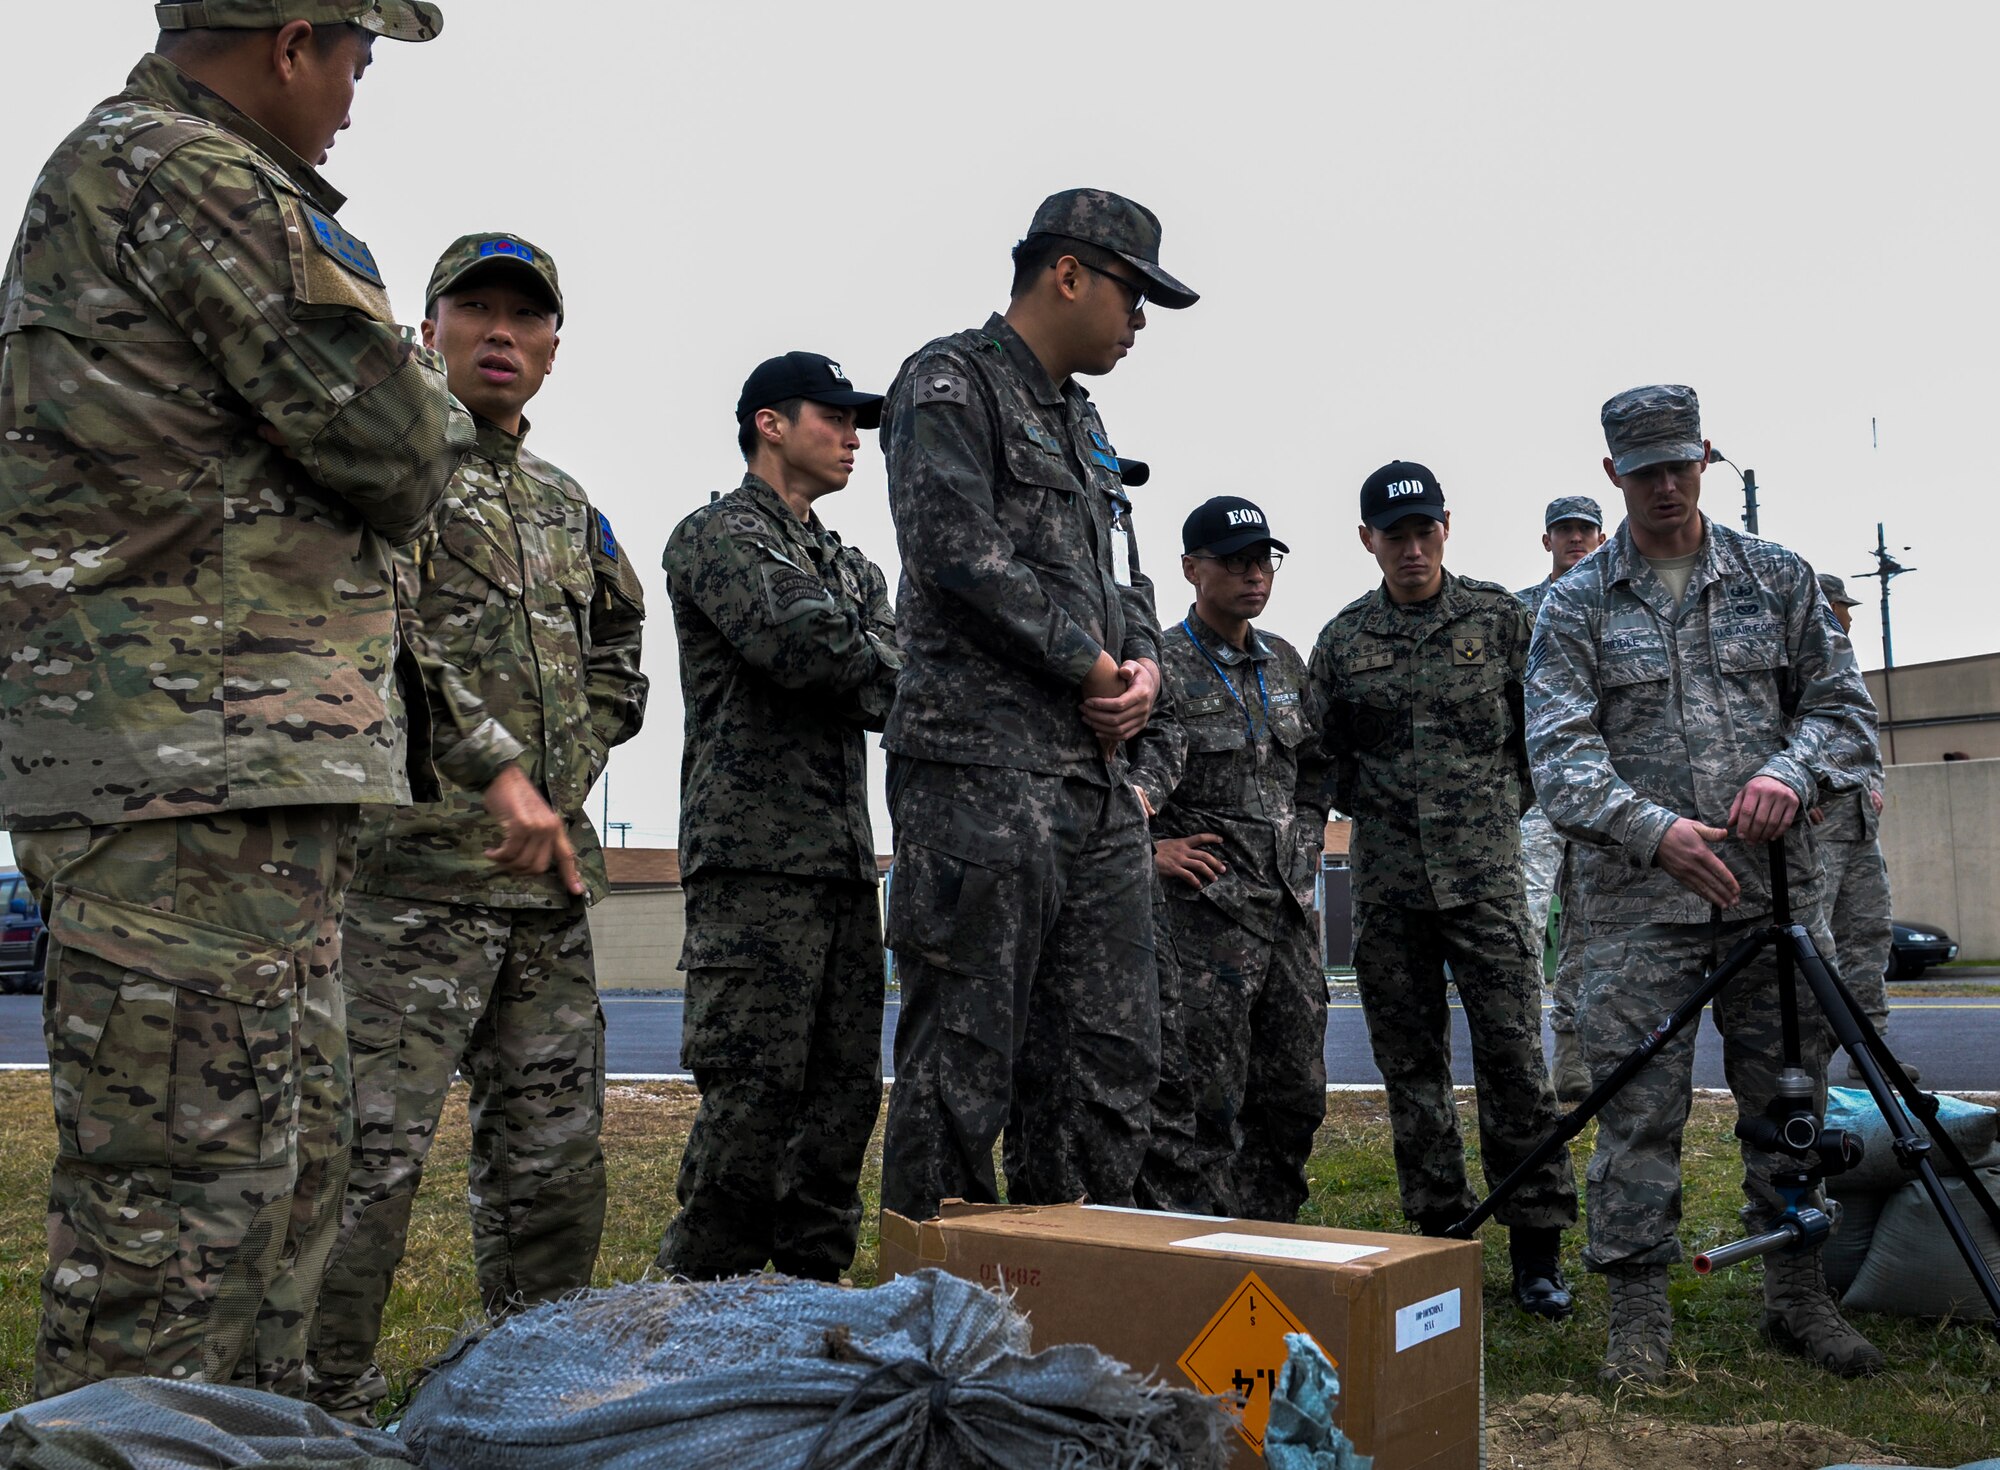 U.S. Air Force Staff Sgt. William Riddle, 8th Civil Engineer Squadron explosive ordnance disposal technician, teaches different ways of disposing ordnance to Republic of Korea Air Force EOD members at Kunsan Air Base, Republic of Korea, Nov. 7, 2016. This training increases U.S. and ROK interoperability and ultimately enhances U.S. and ROK commitments to maintain peace in the region. (U.S. Air Force photo by Senior Airman Colville McFee/Released)